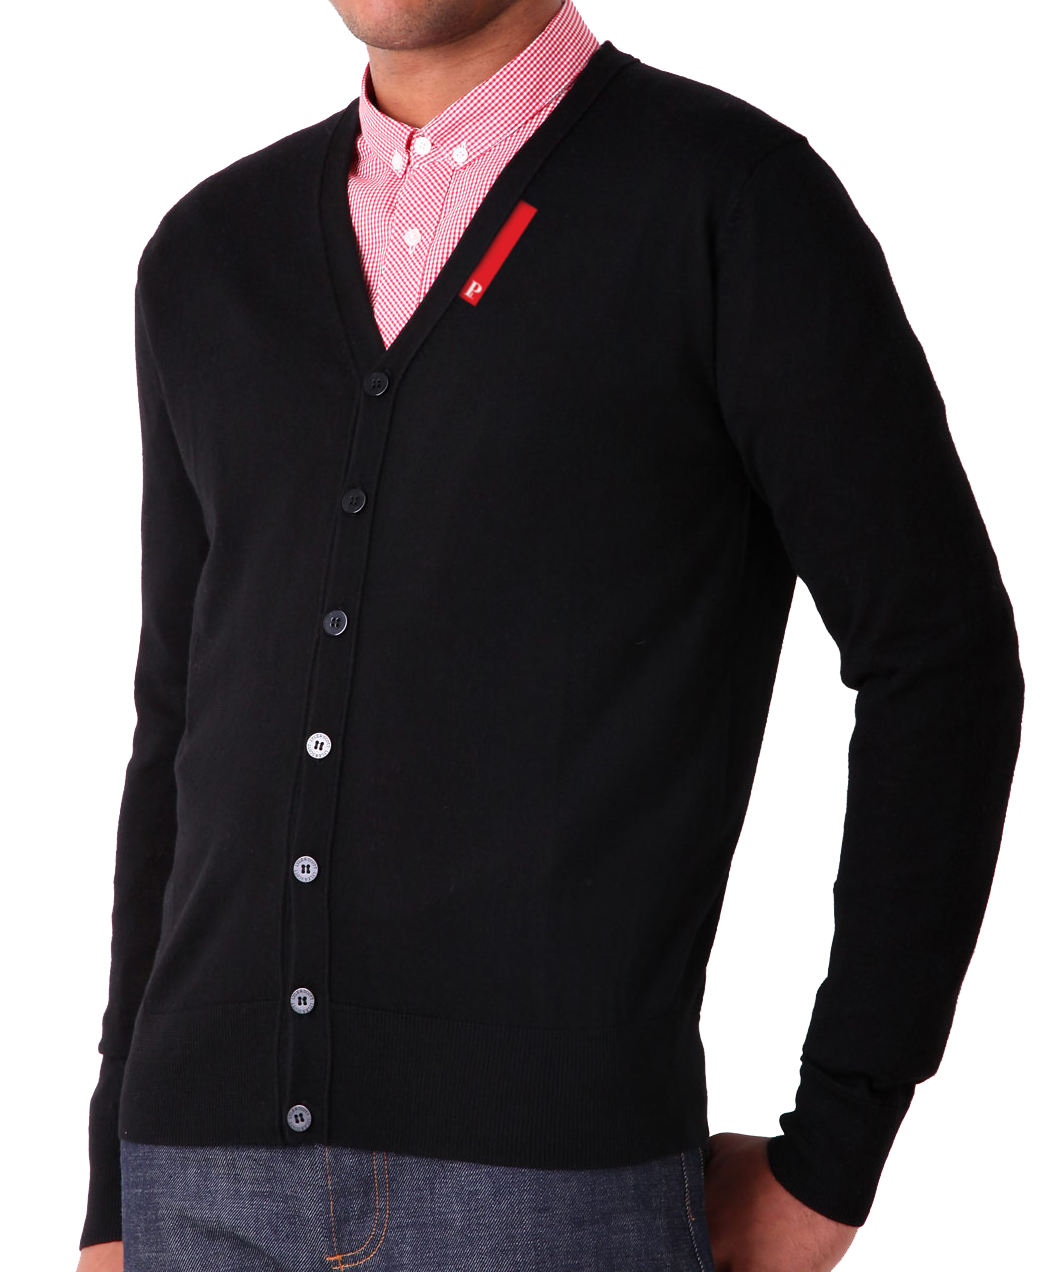 PL Clothing - The Paris Collection: First Cardigan From The Paris ...